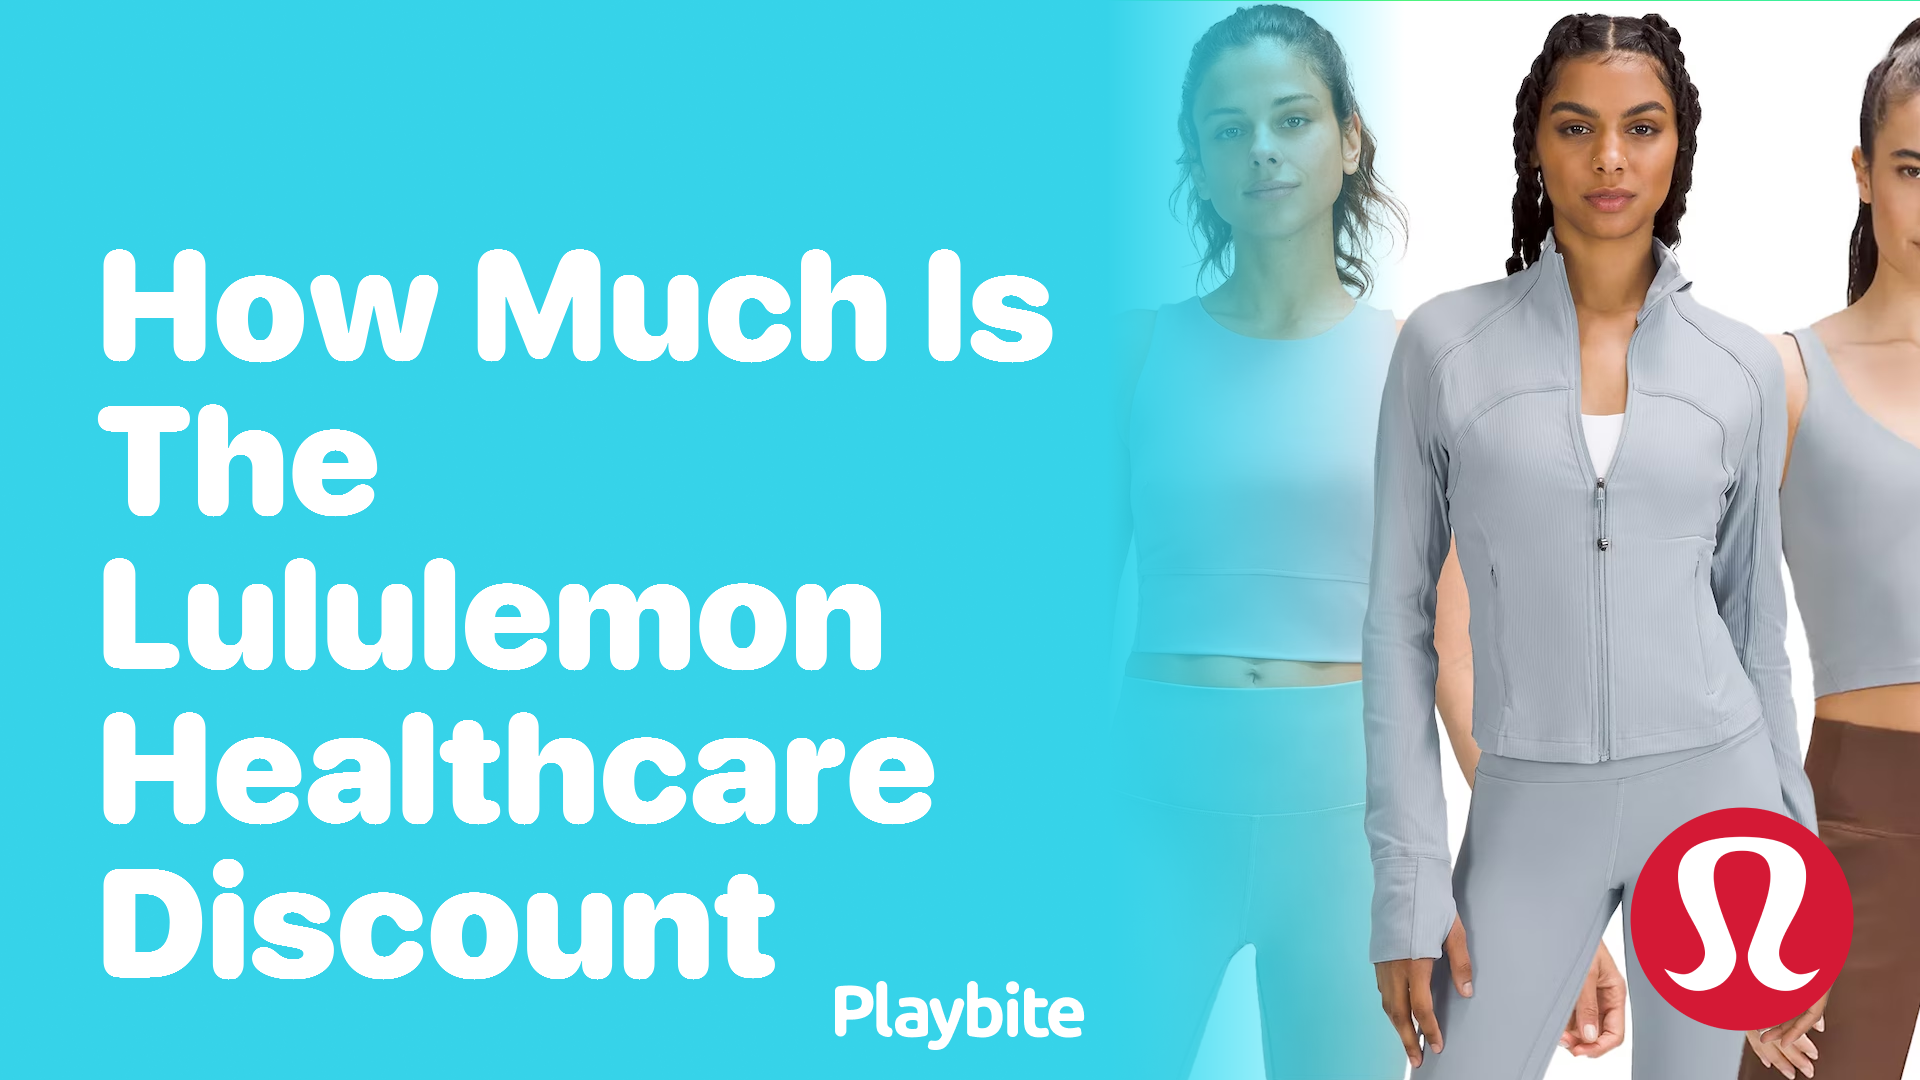 How Much Is the Lululemon Healthcare Discount?